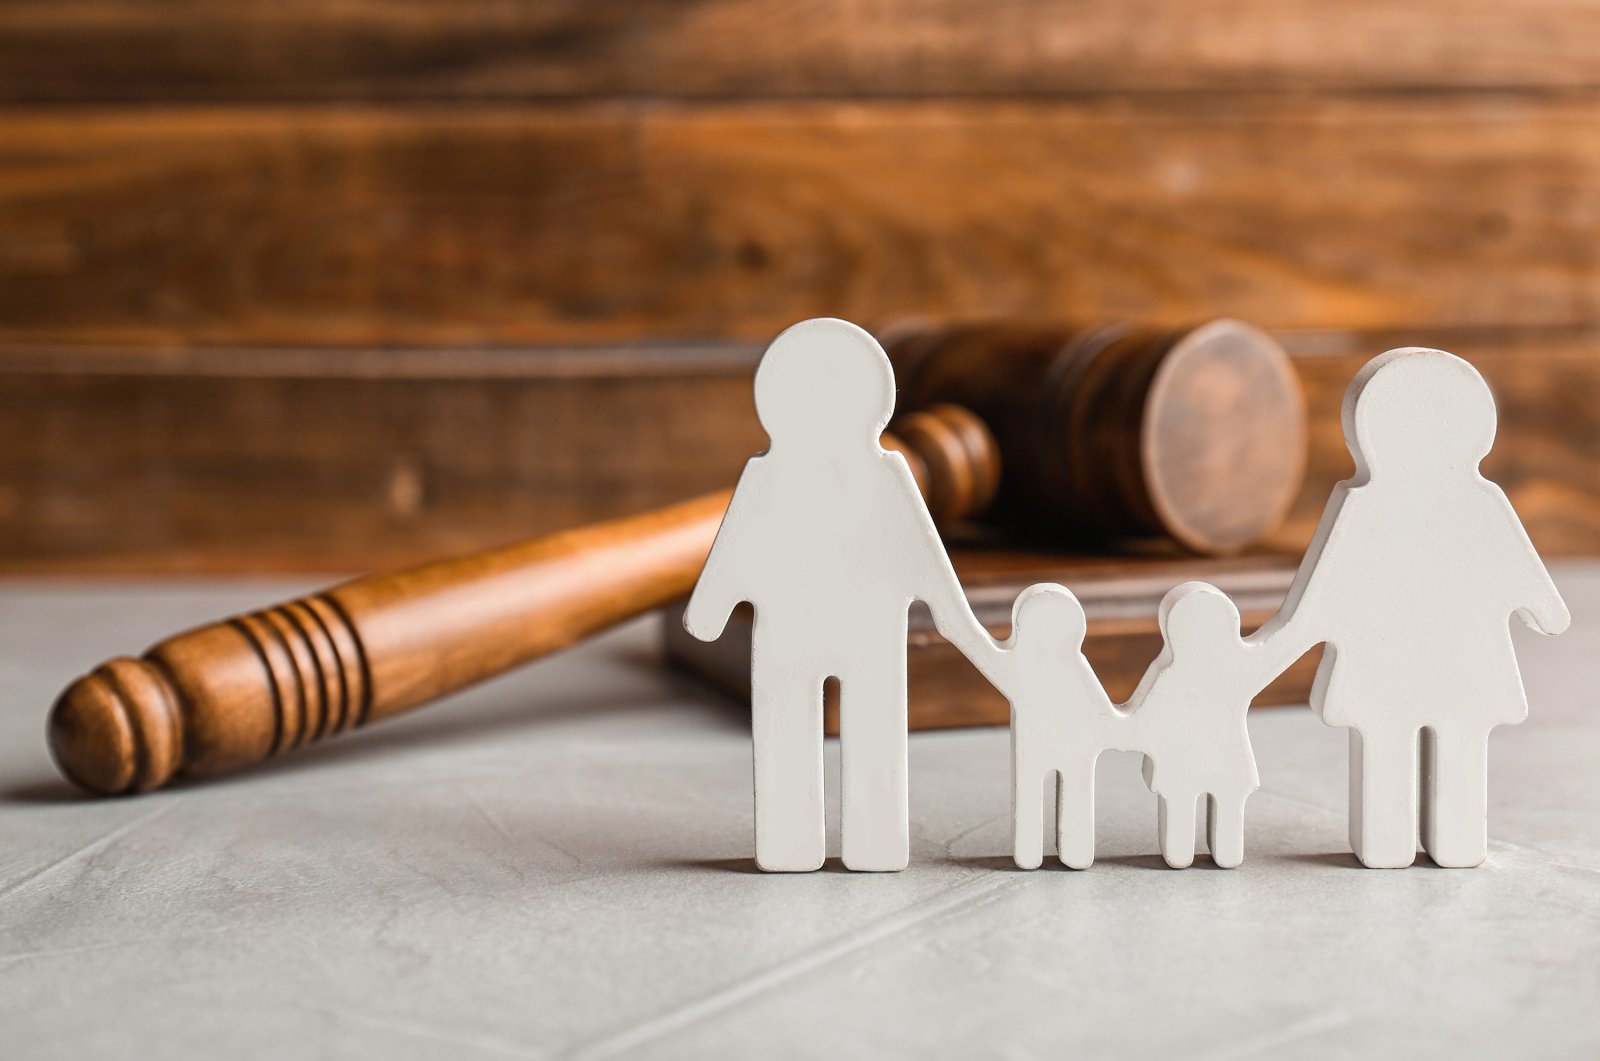 Family figurine and gavel on table (Shutterstock Photo)